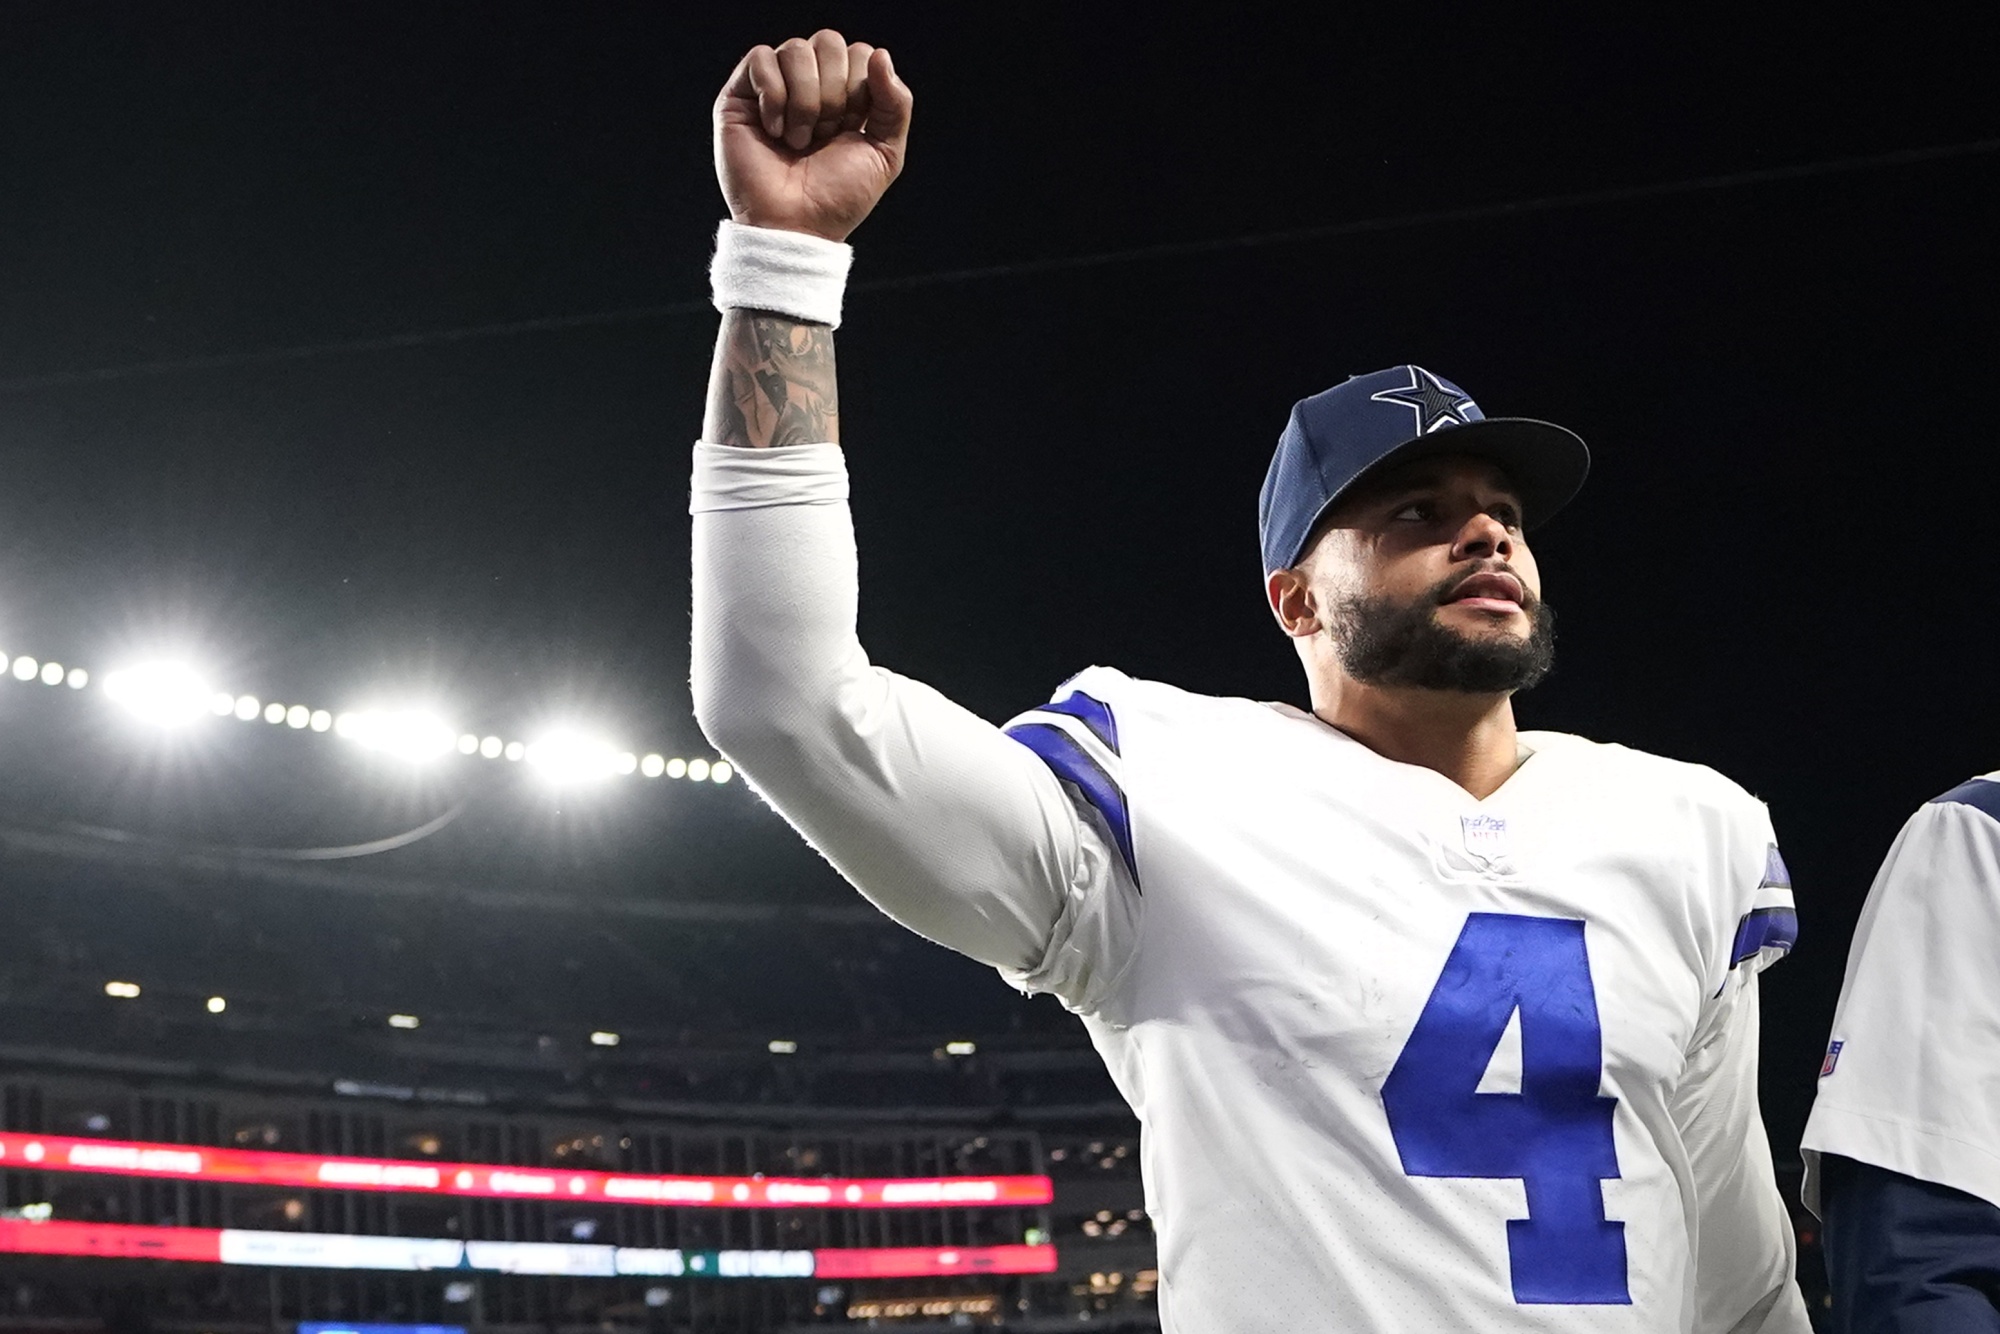 Dak Prescott's injury gives Cowboys even more reason to work out